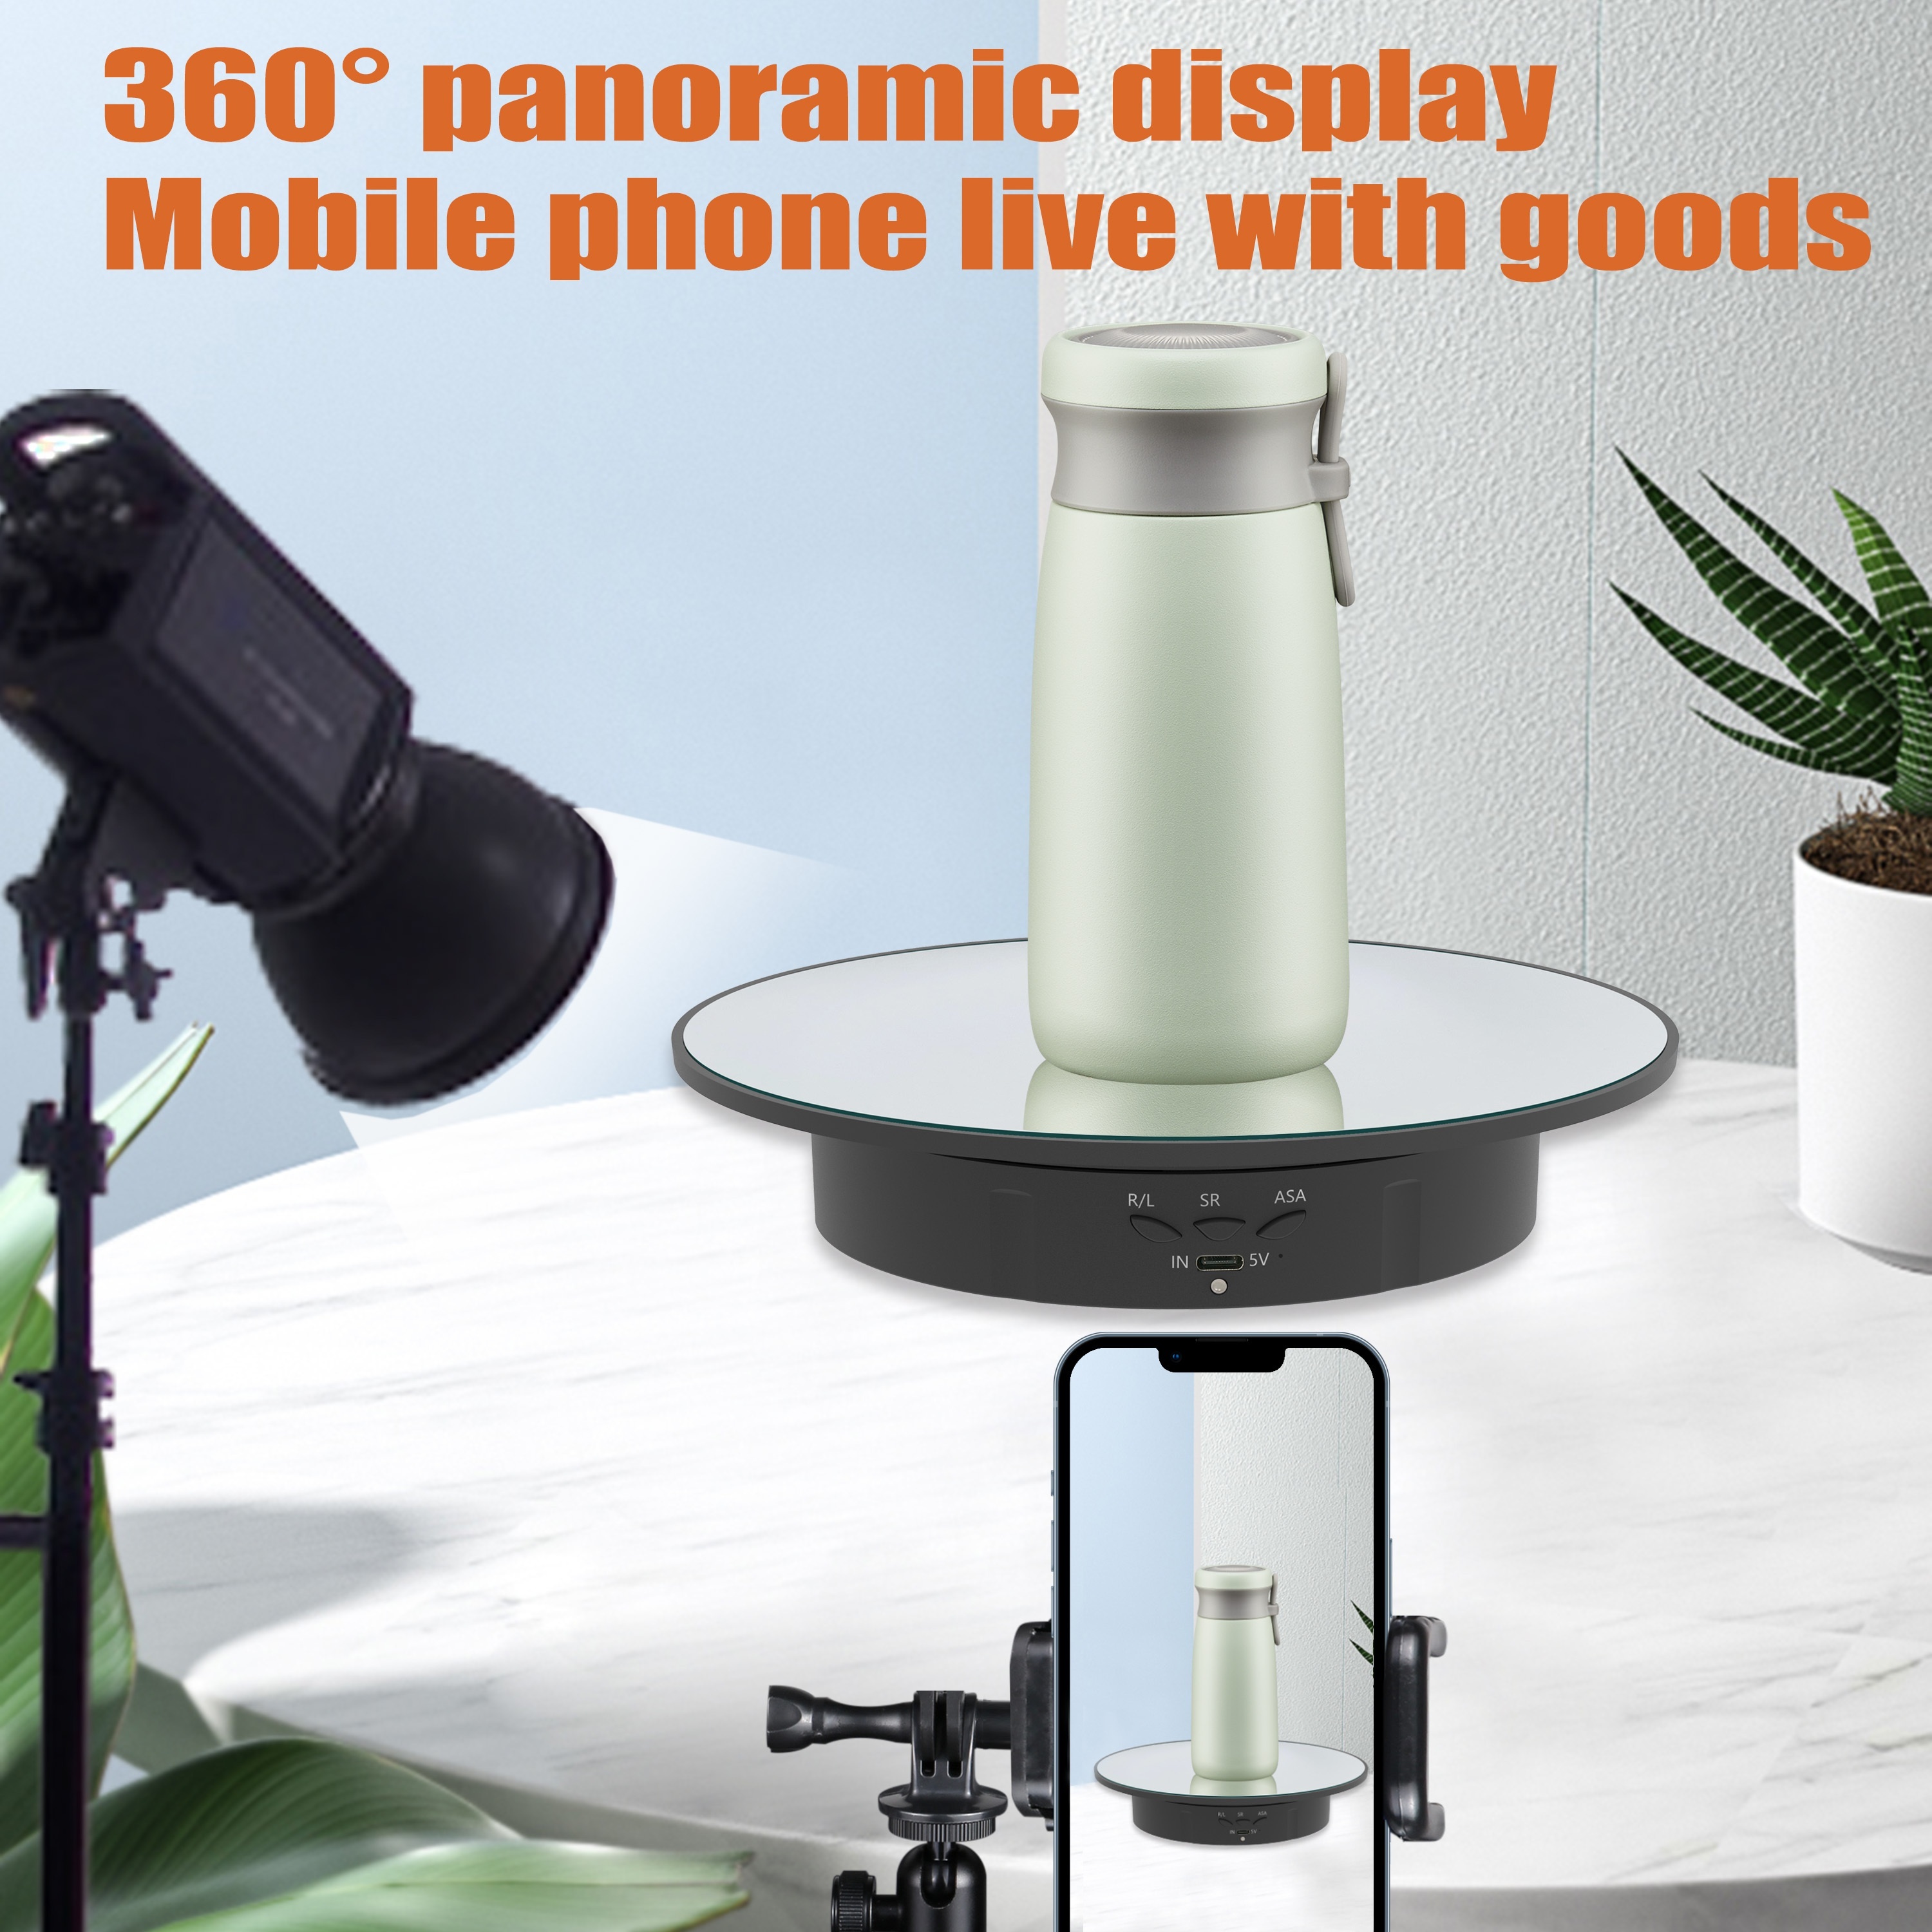 

Motorized Rotating Display Stand, 7.87" Pedestal, 360° Adjustable Speed, 17 Lb Load Capacity, Photography Jewelry 3d Model Exhibition, Usb Or Battery Powered (18650 Not Included), Plastic Turntable